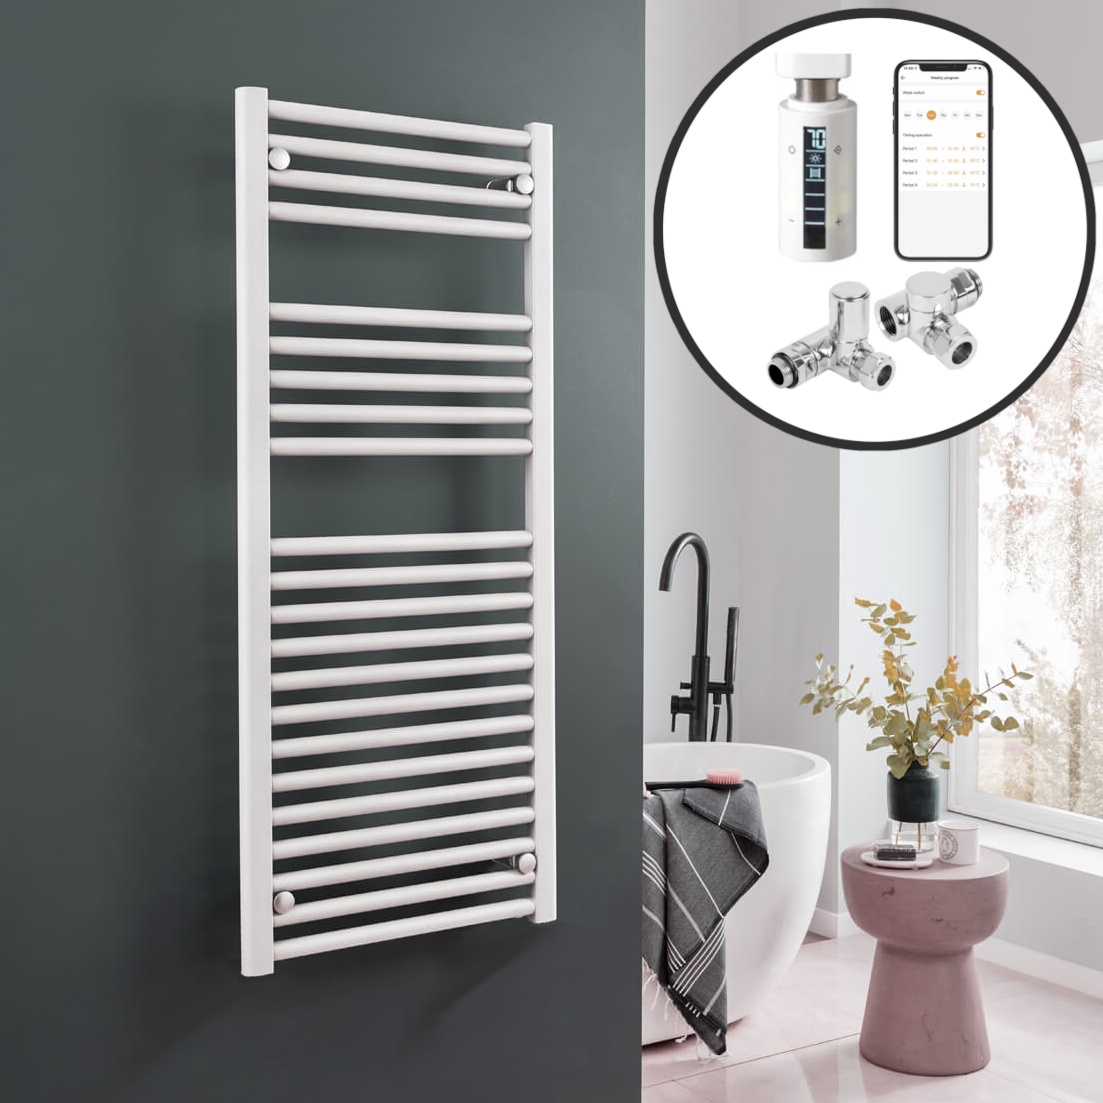 Bray Straight White | Dual Fuel Towel Rail with Thermostat, Timer + WiFi Control Best Quality & Price, Energy Saving / Economic To Run Buy Online From Adax SolAire UK Shop